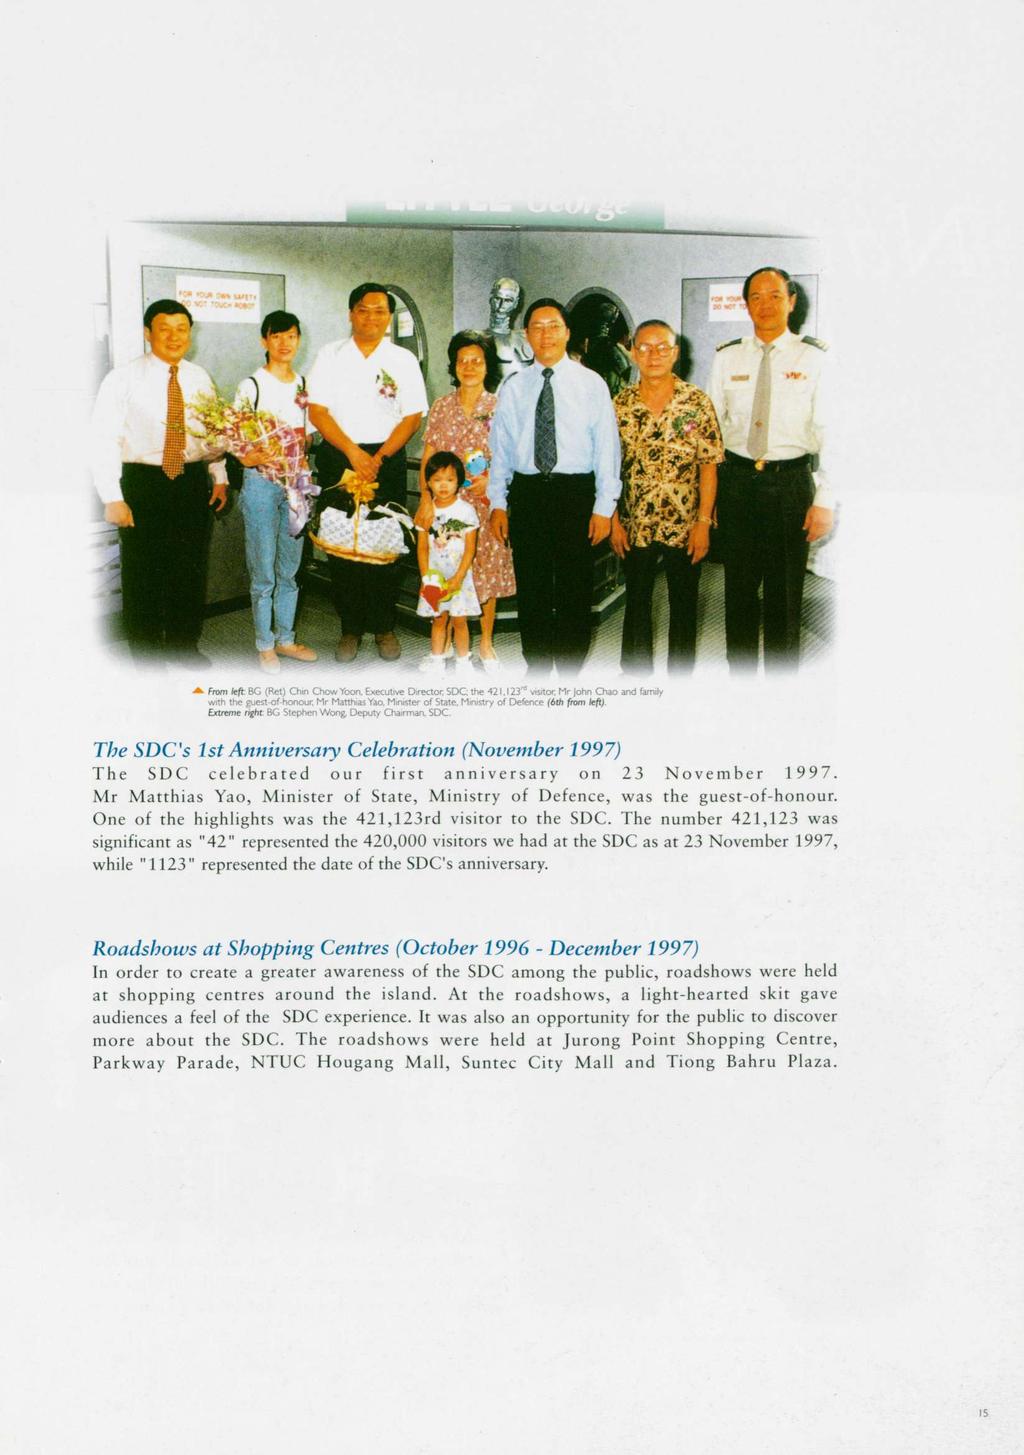 ^ From left BG (Ret) Chin Chow Yoon, Executive Director SDC; the 421,123 d visitor Mr John Chao and family with the guest-of-honour, Mr Matthias Yao, Minister of State, Ministry of Defence (6th from